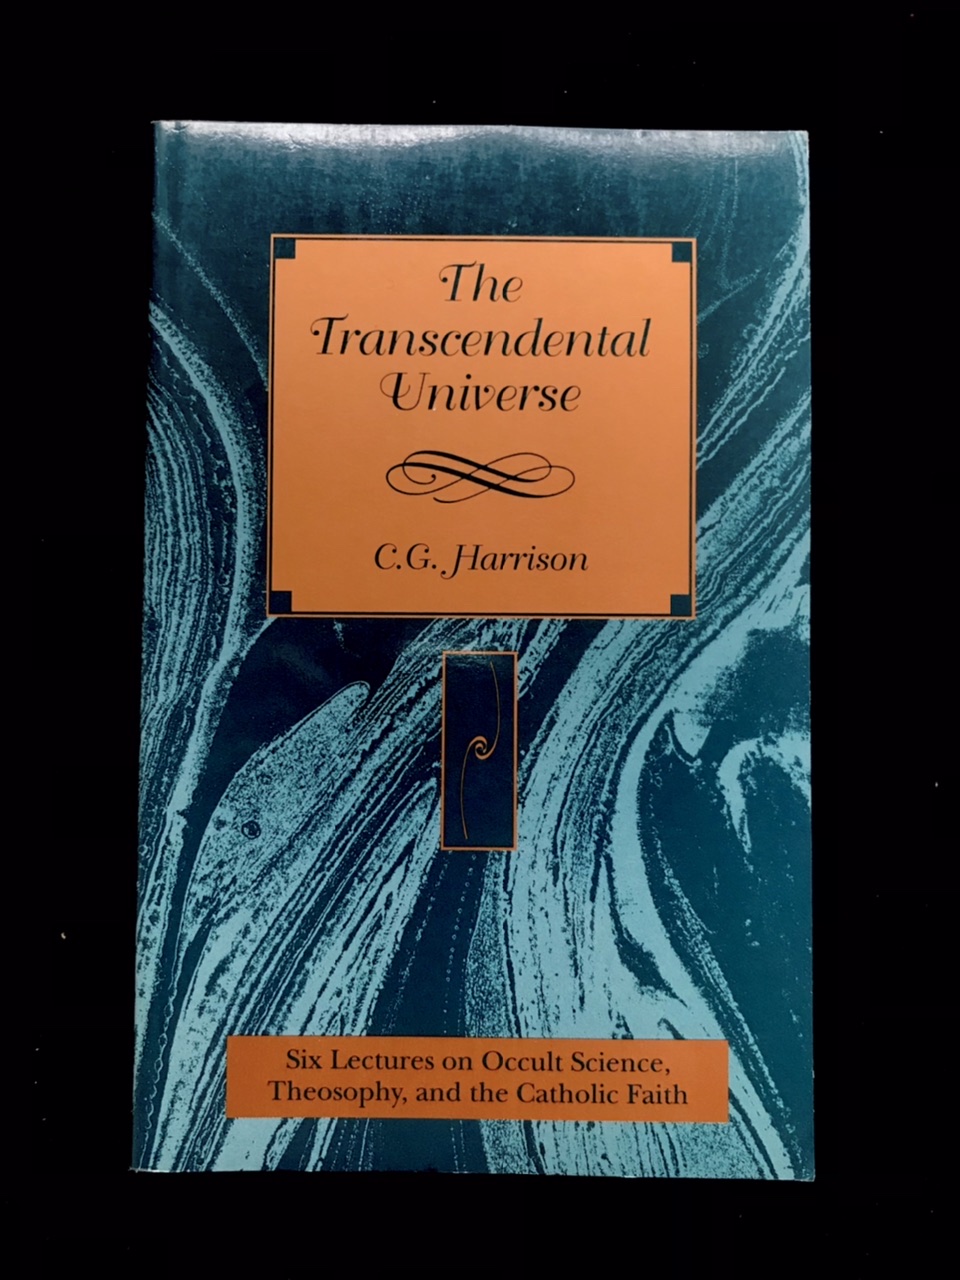 The Transcendental Universe by C. G. Harrison